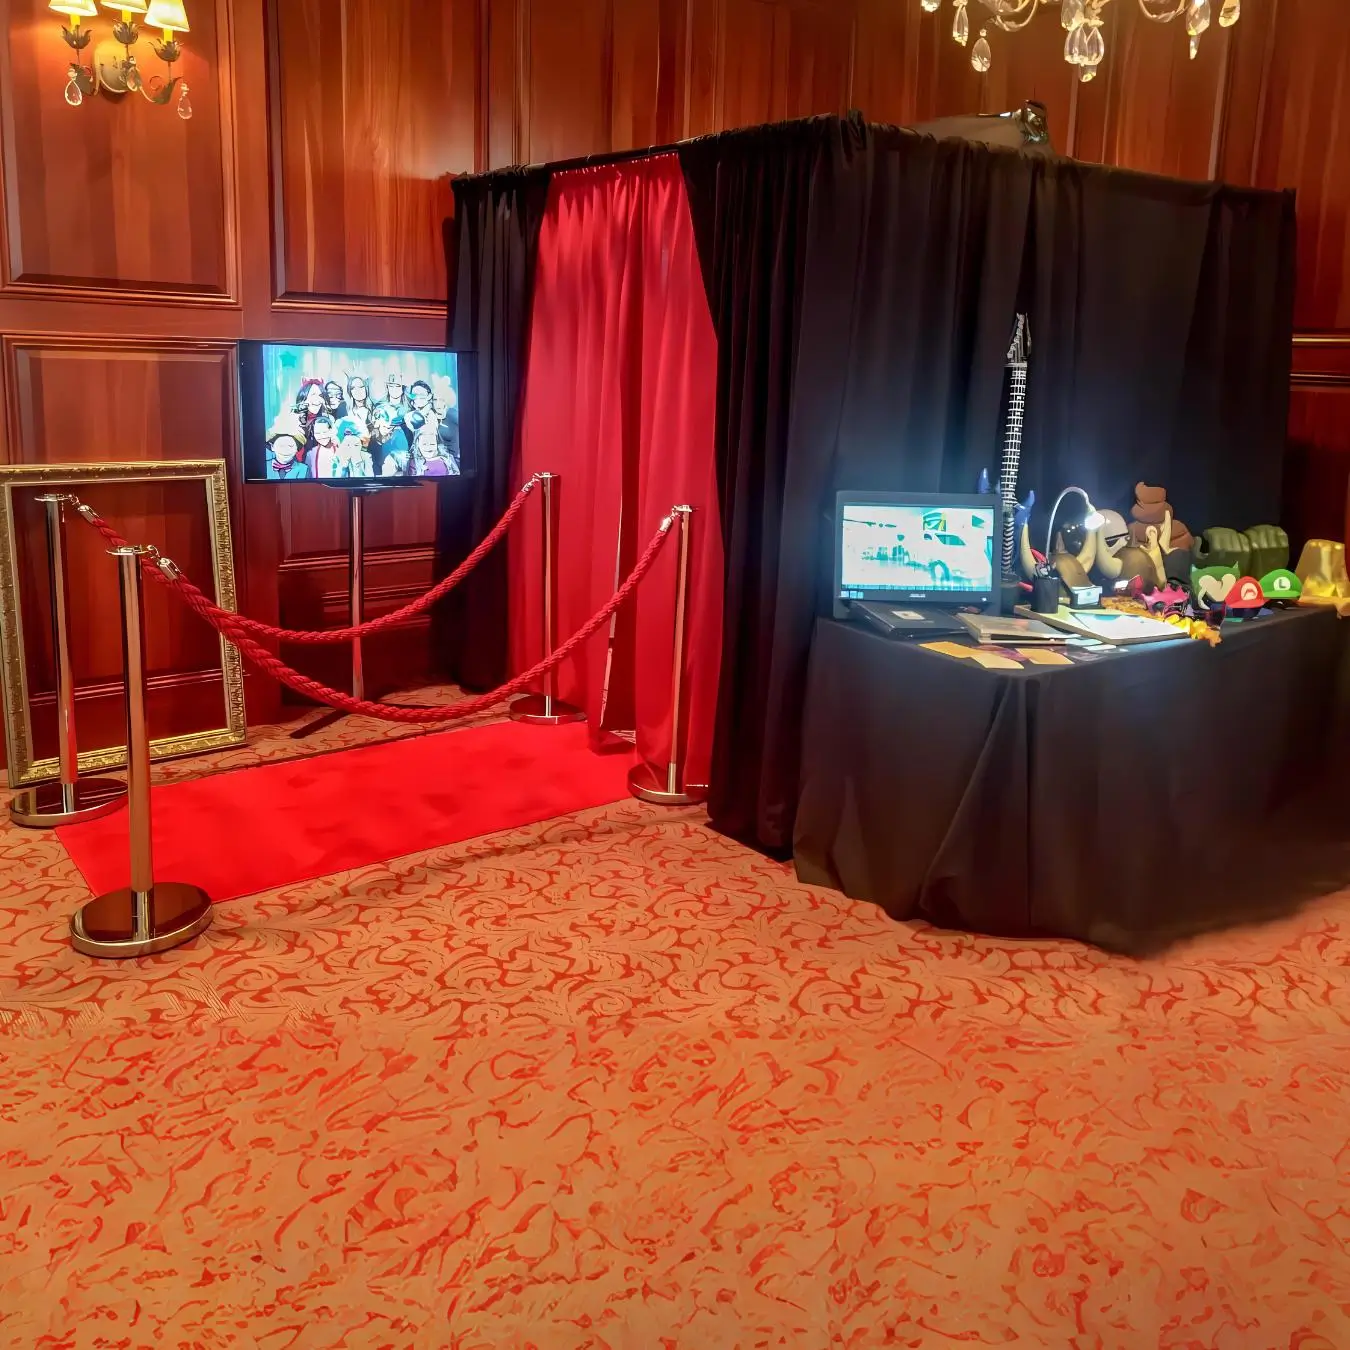 Enclosed Photo Booth